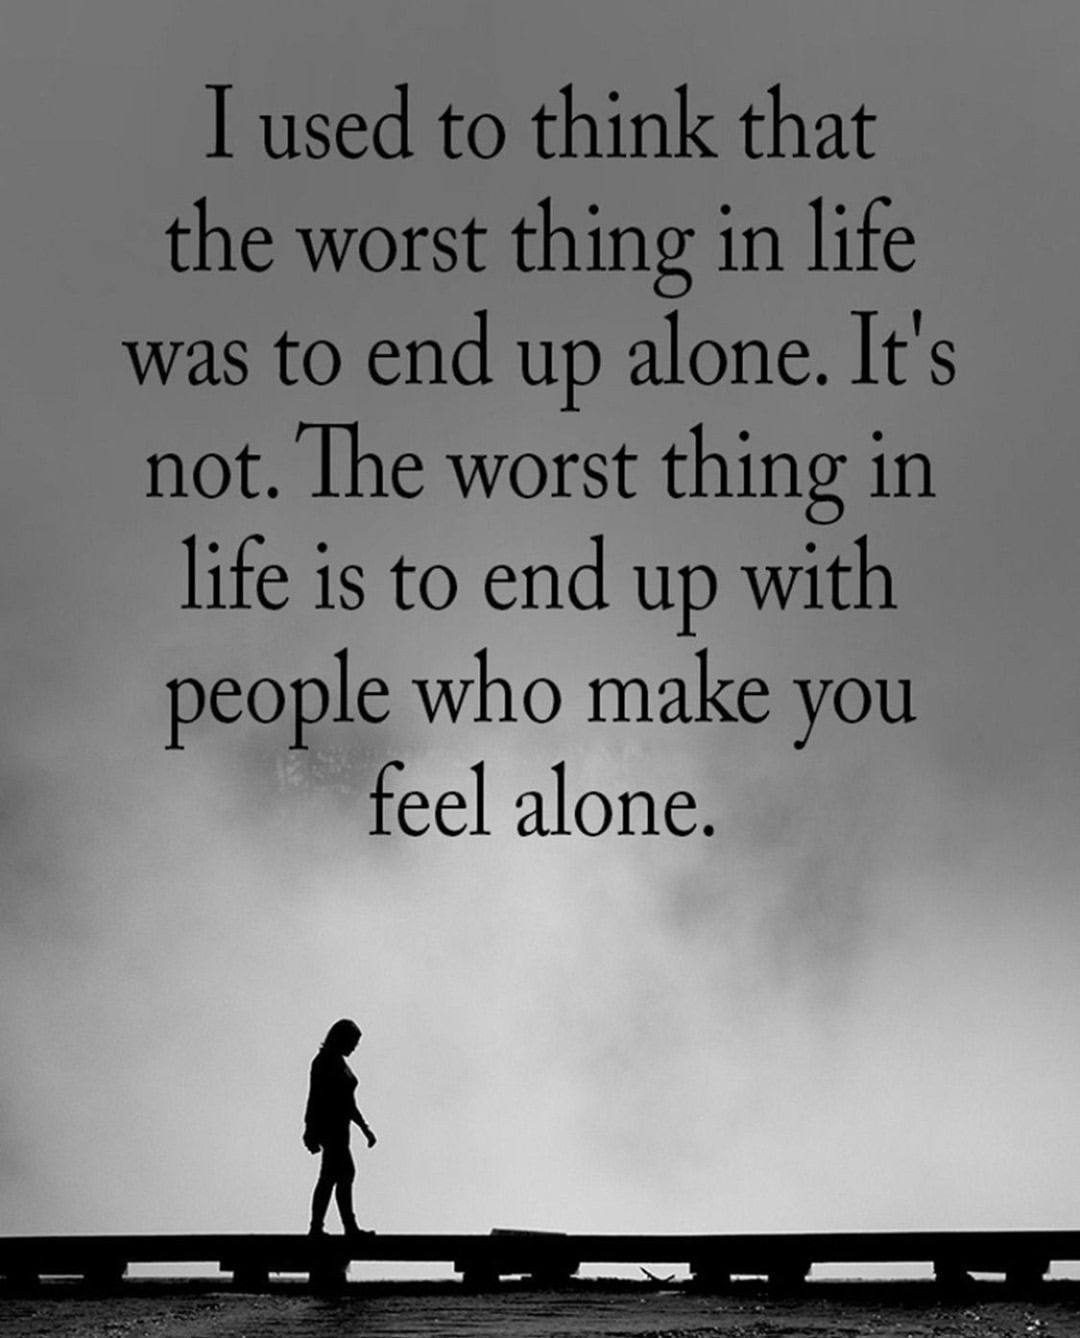 I used to think that the worst thing in life was to end up alone. It's not. The worst thing in life is to end up with people who make you feel alone.